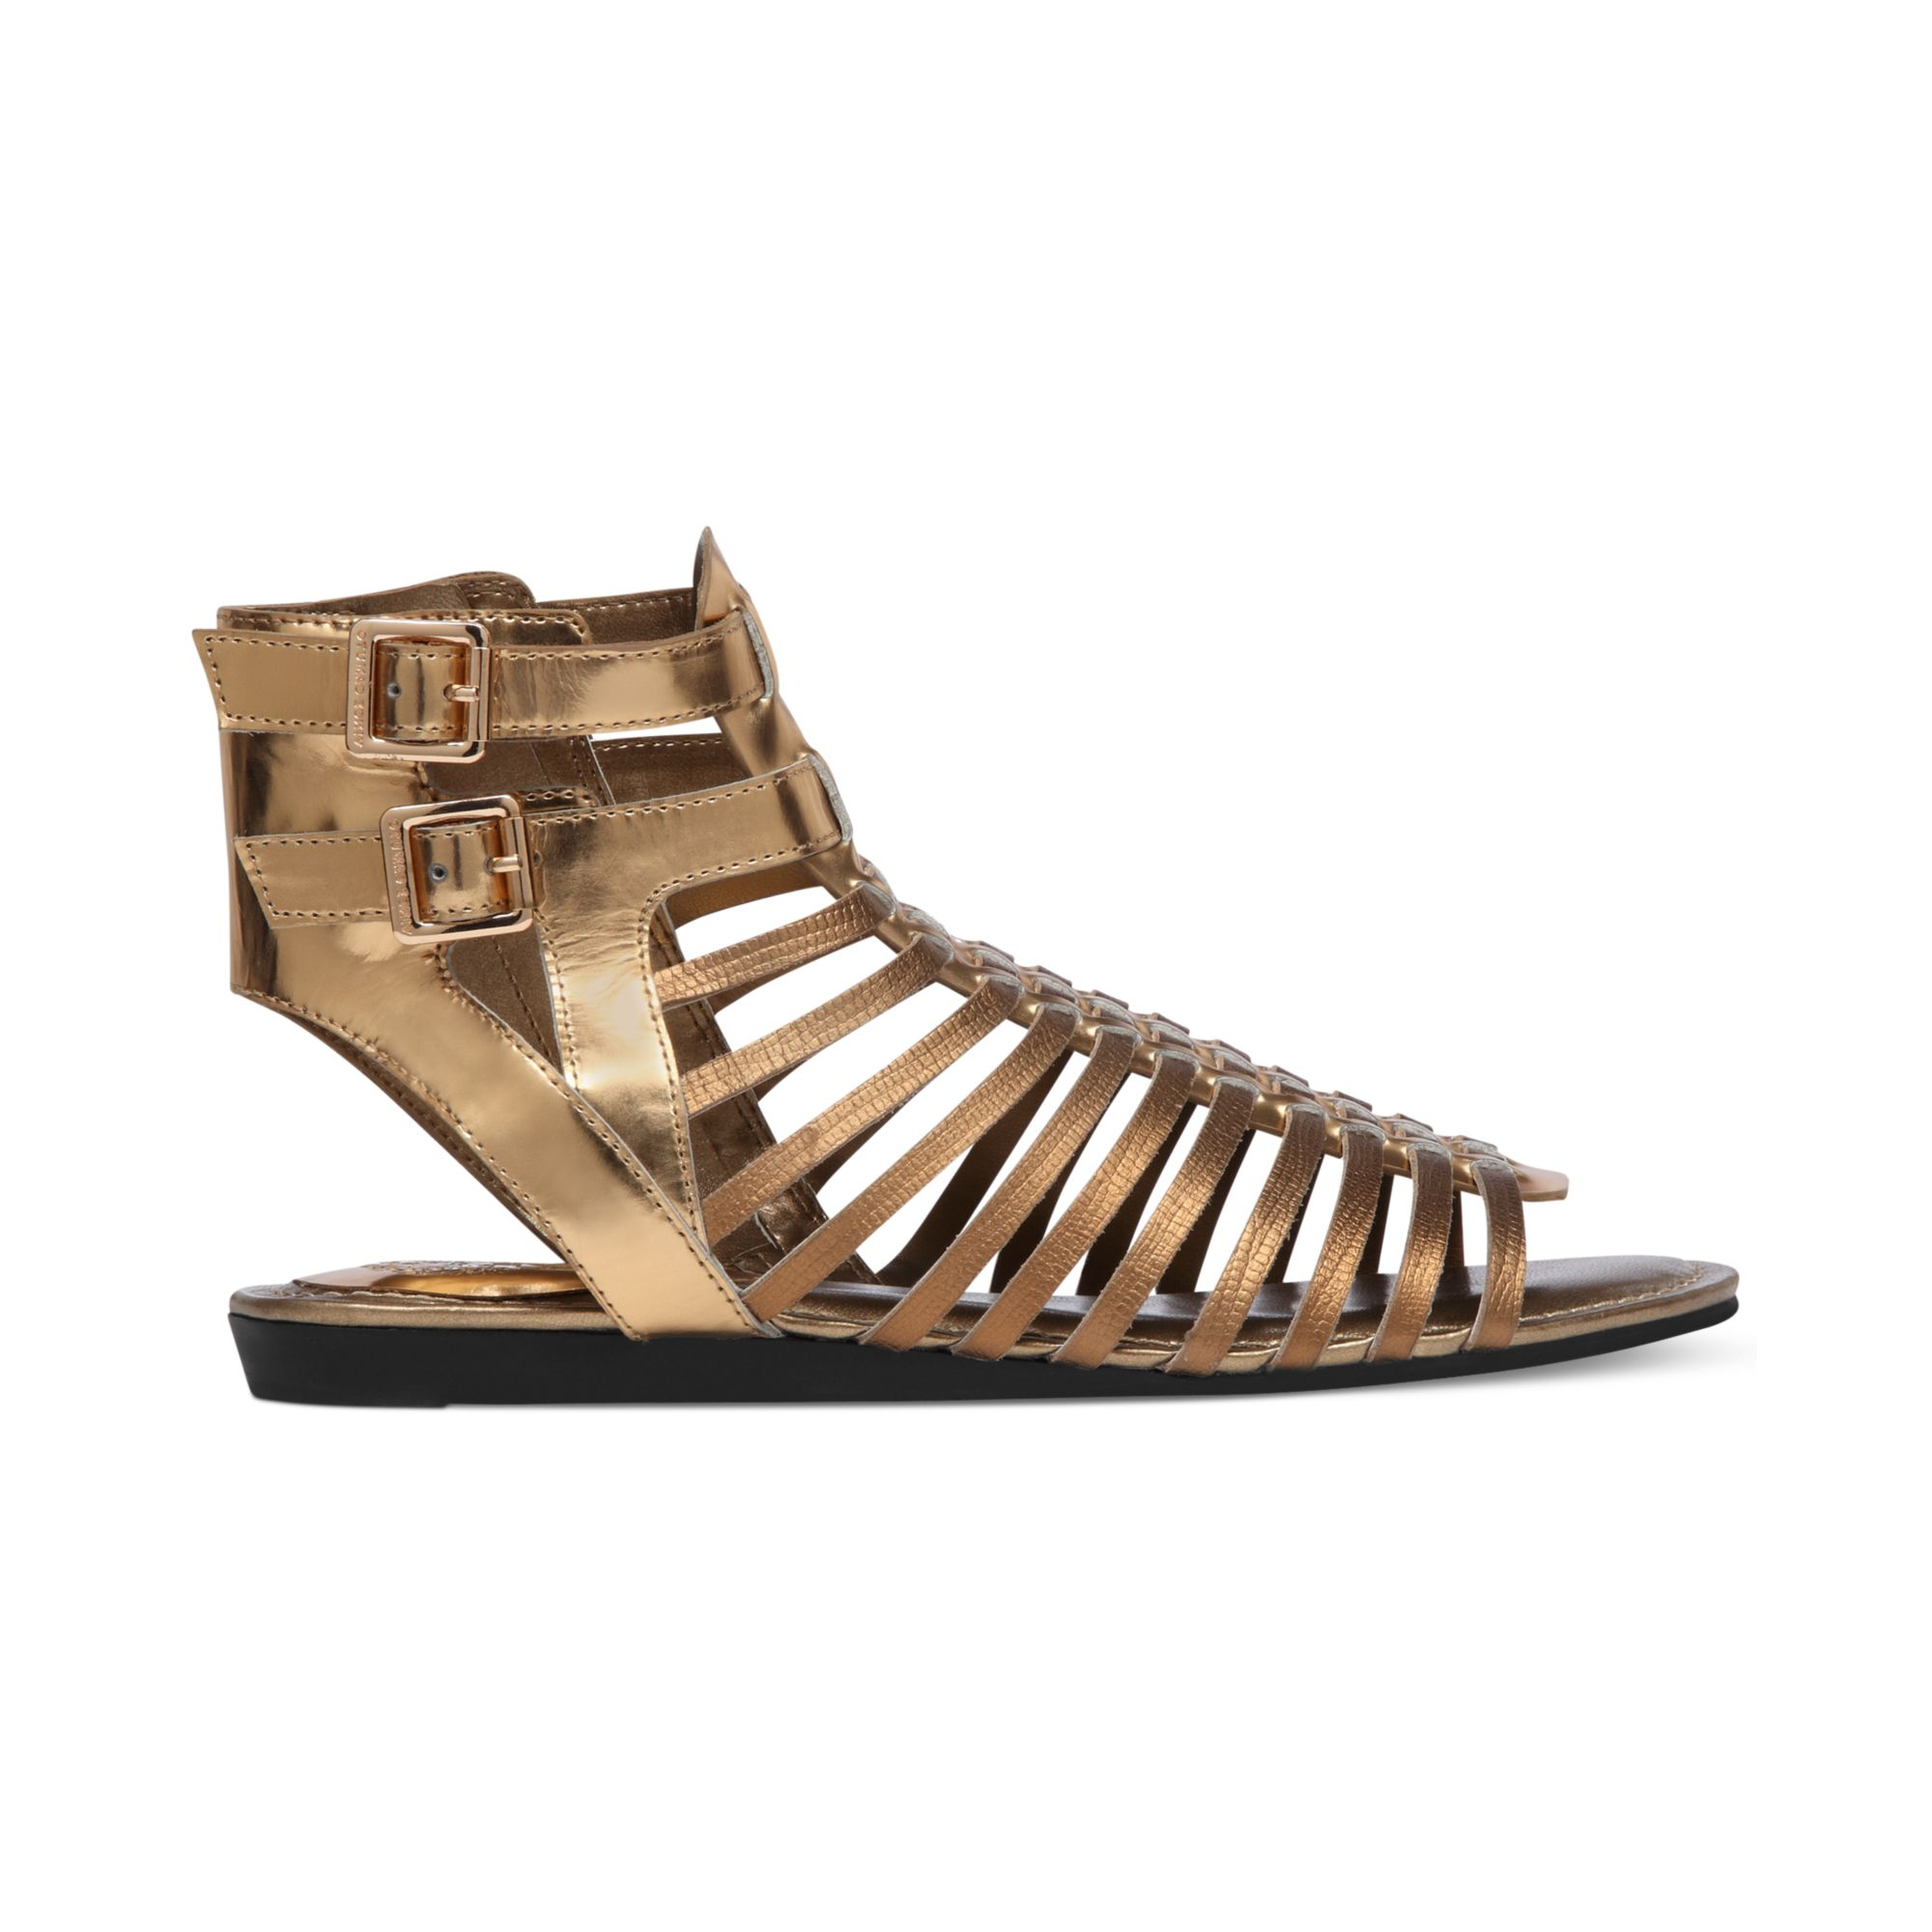 Vince Camuto Kensil Gladiator Sandals in Copper (Metallic) - Lyst